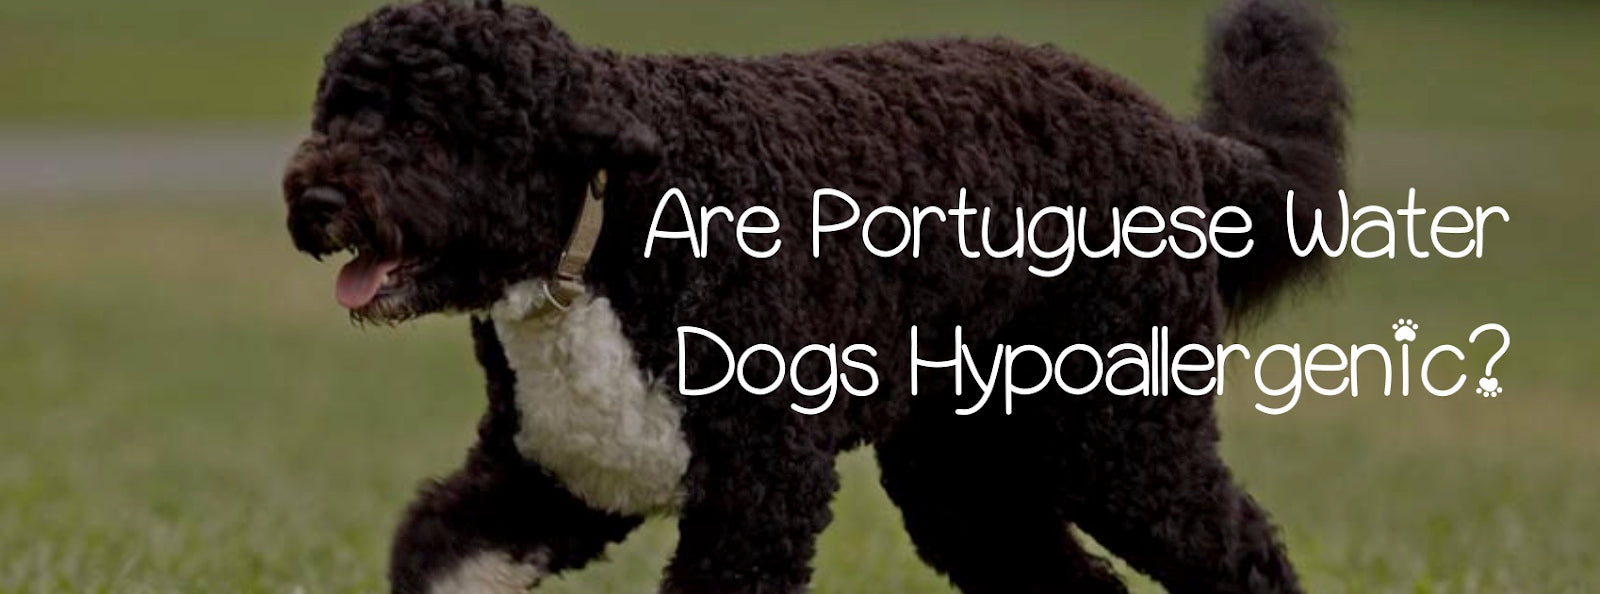 ARE PORTUGUESE WATER DOGS HYPOALLERGENIC?